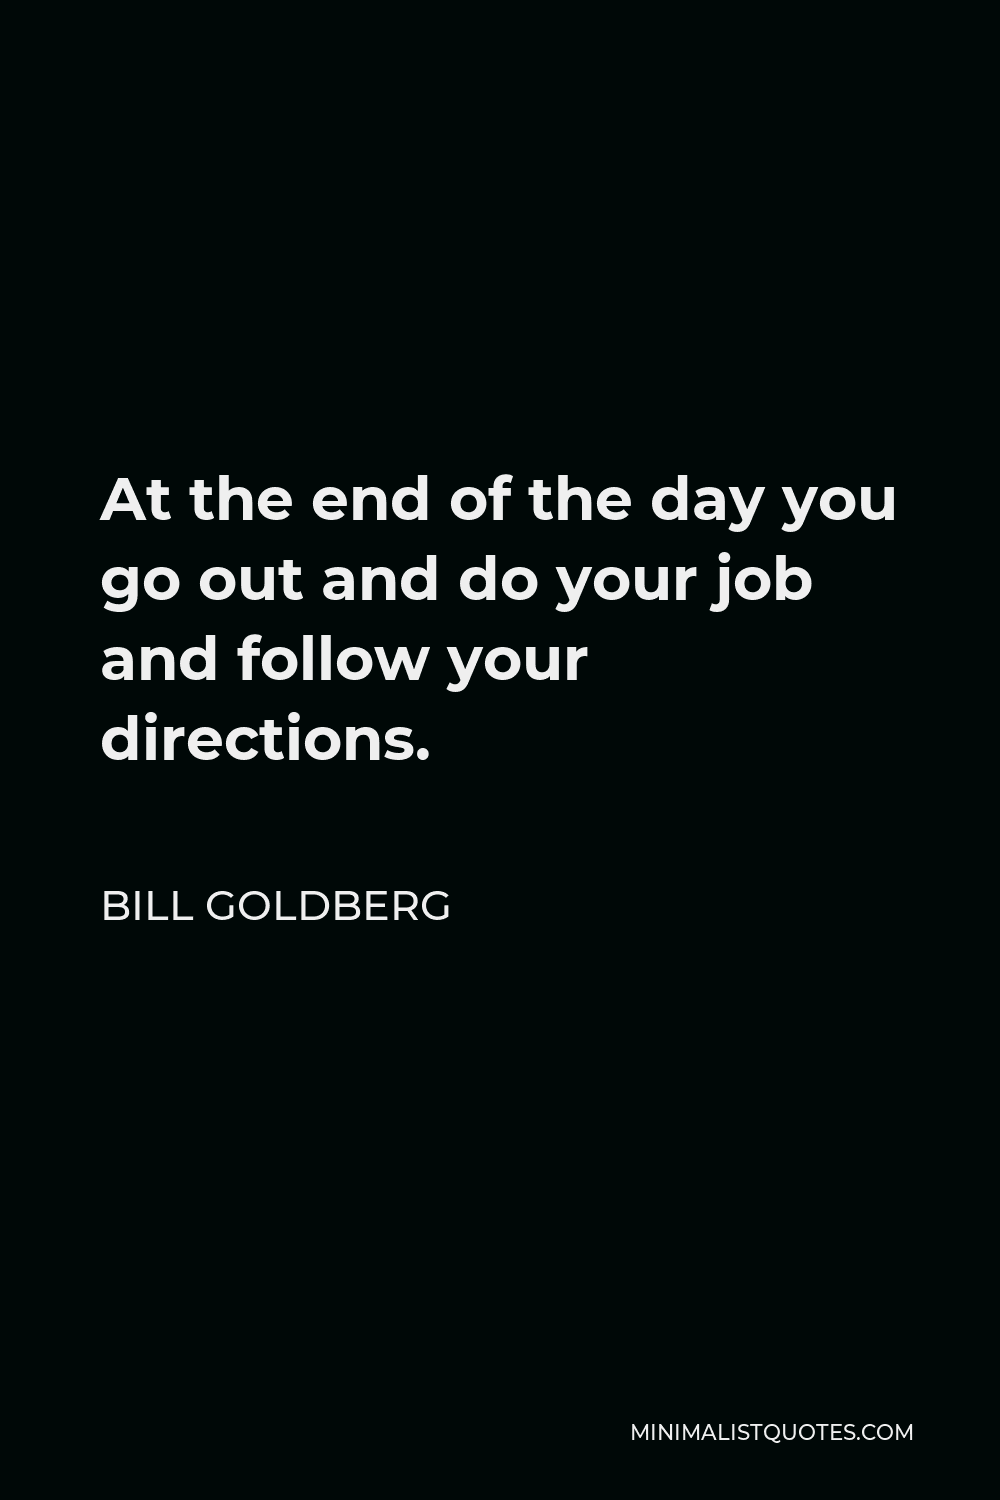 Bill Goldberg Quote - At the end of the day you go out and do your job and follow your directions.